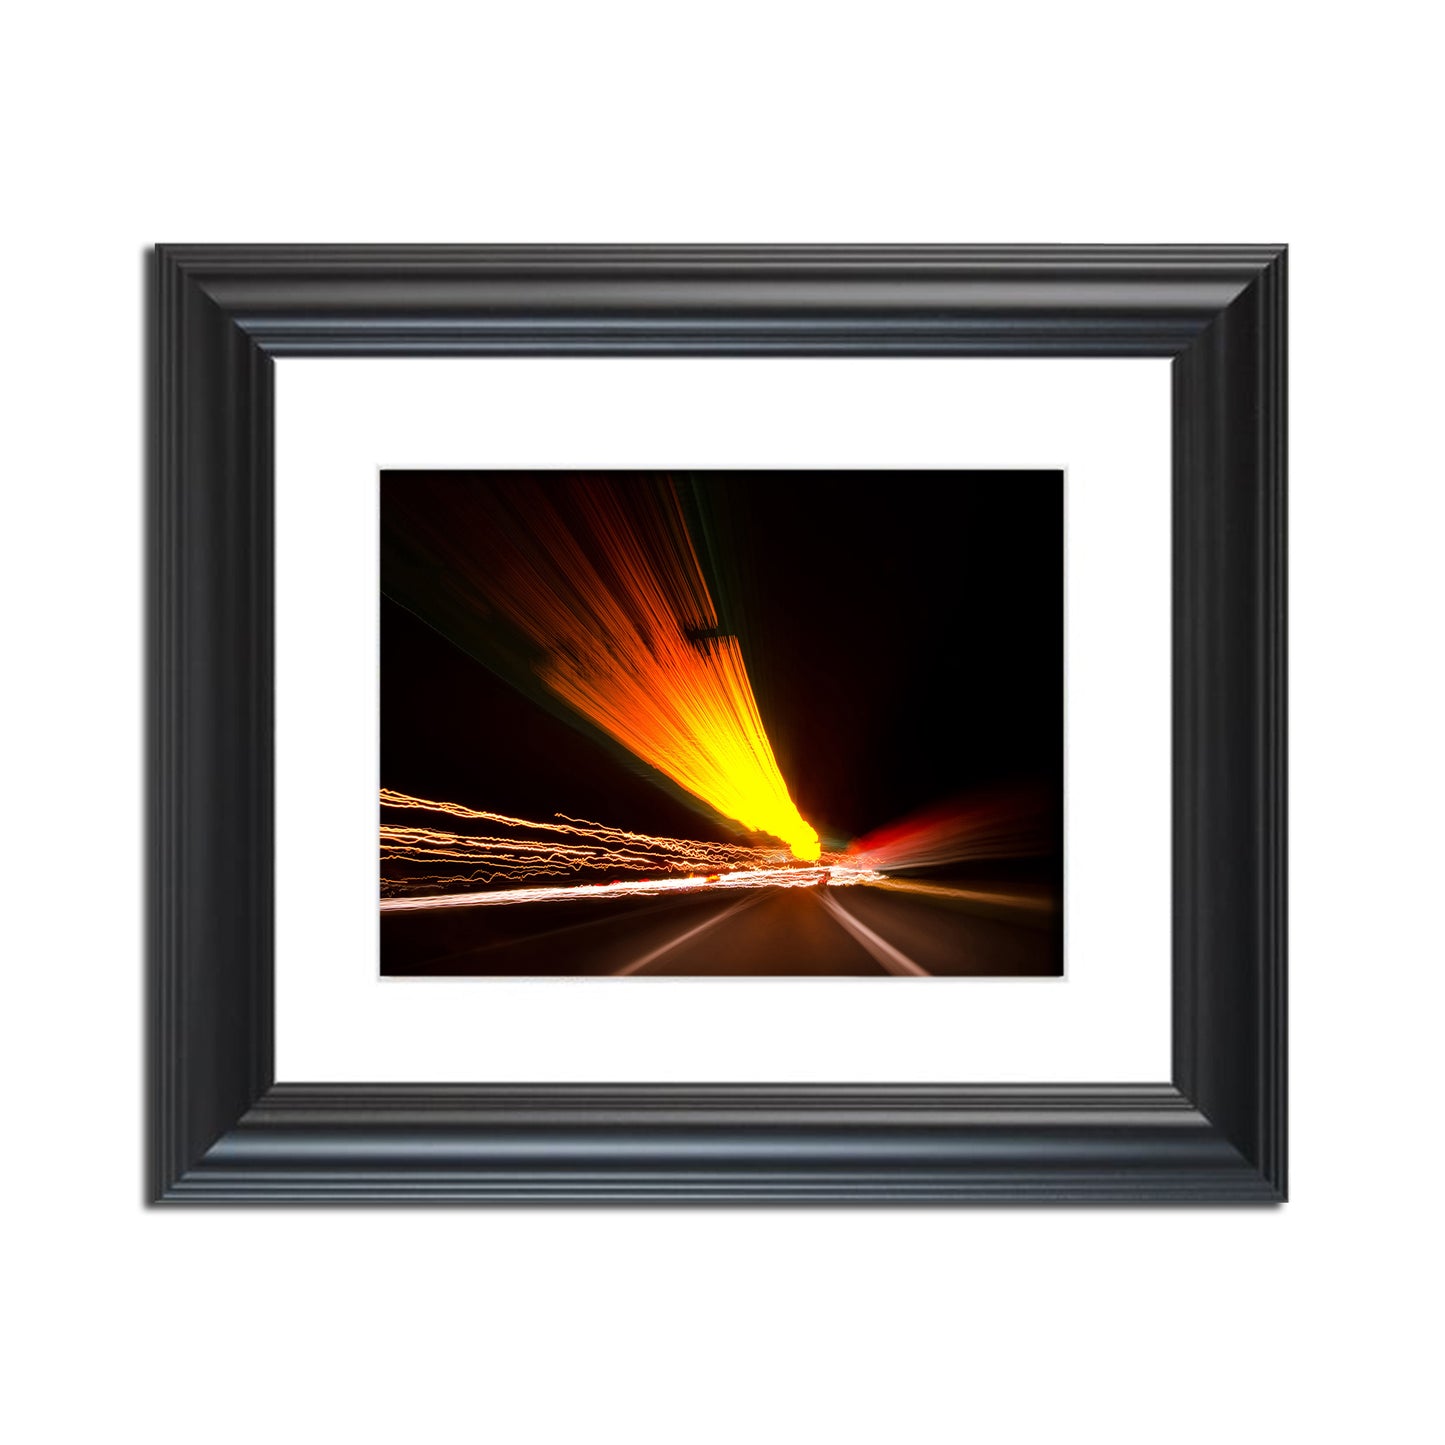 Expressway Abstract Night Photo Fine Art Canvas & Unframed Wall Art Prints  - PIPAFINEART